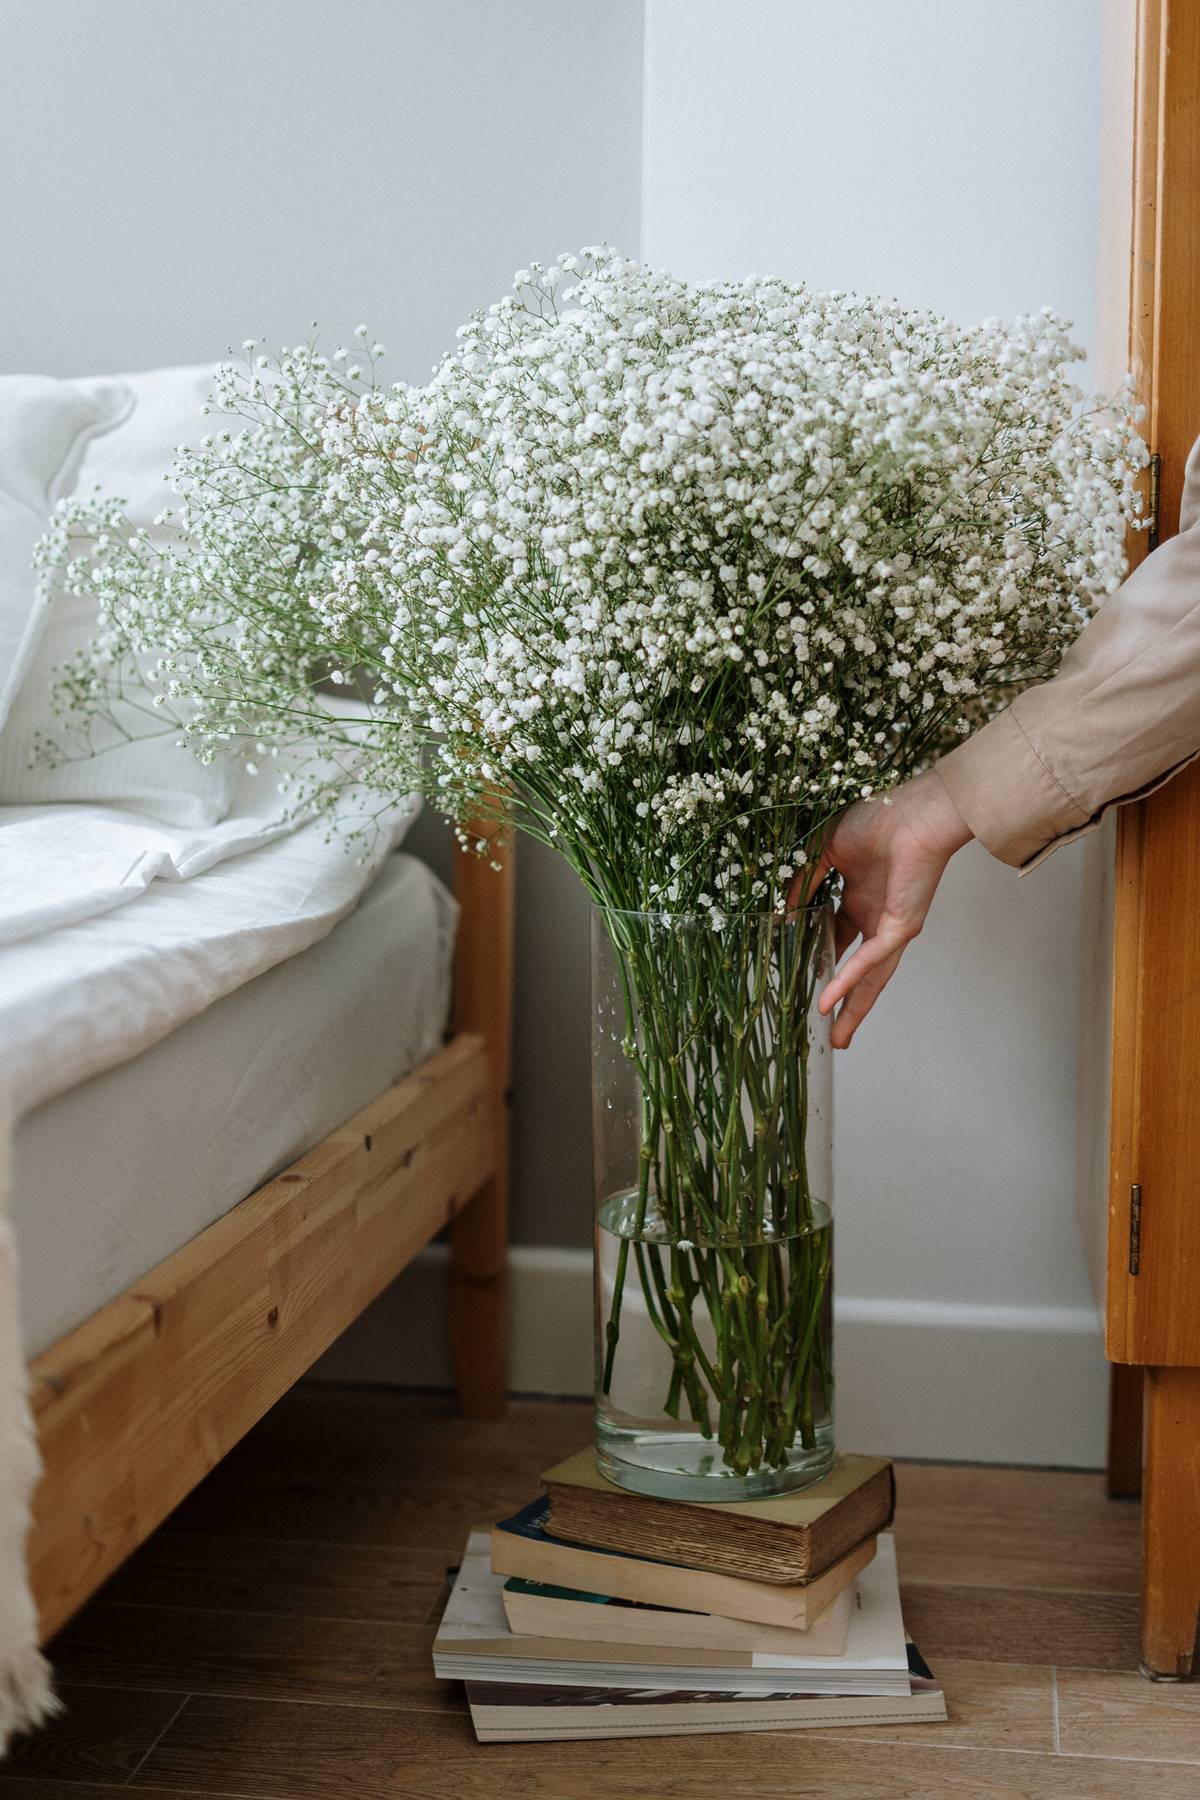 Flowers By The Bed